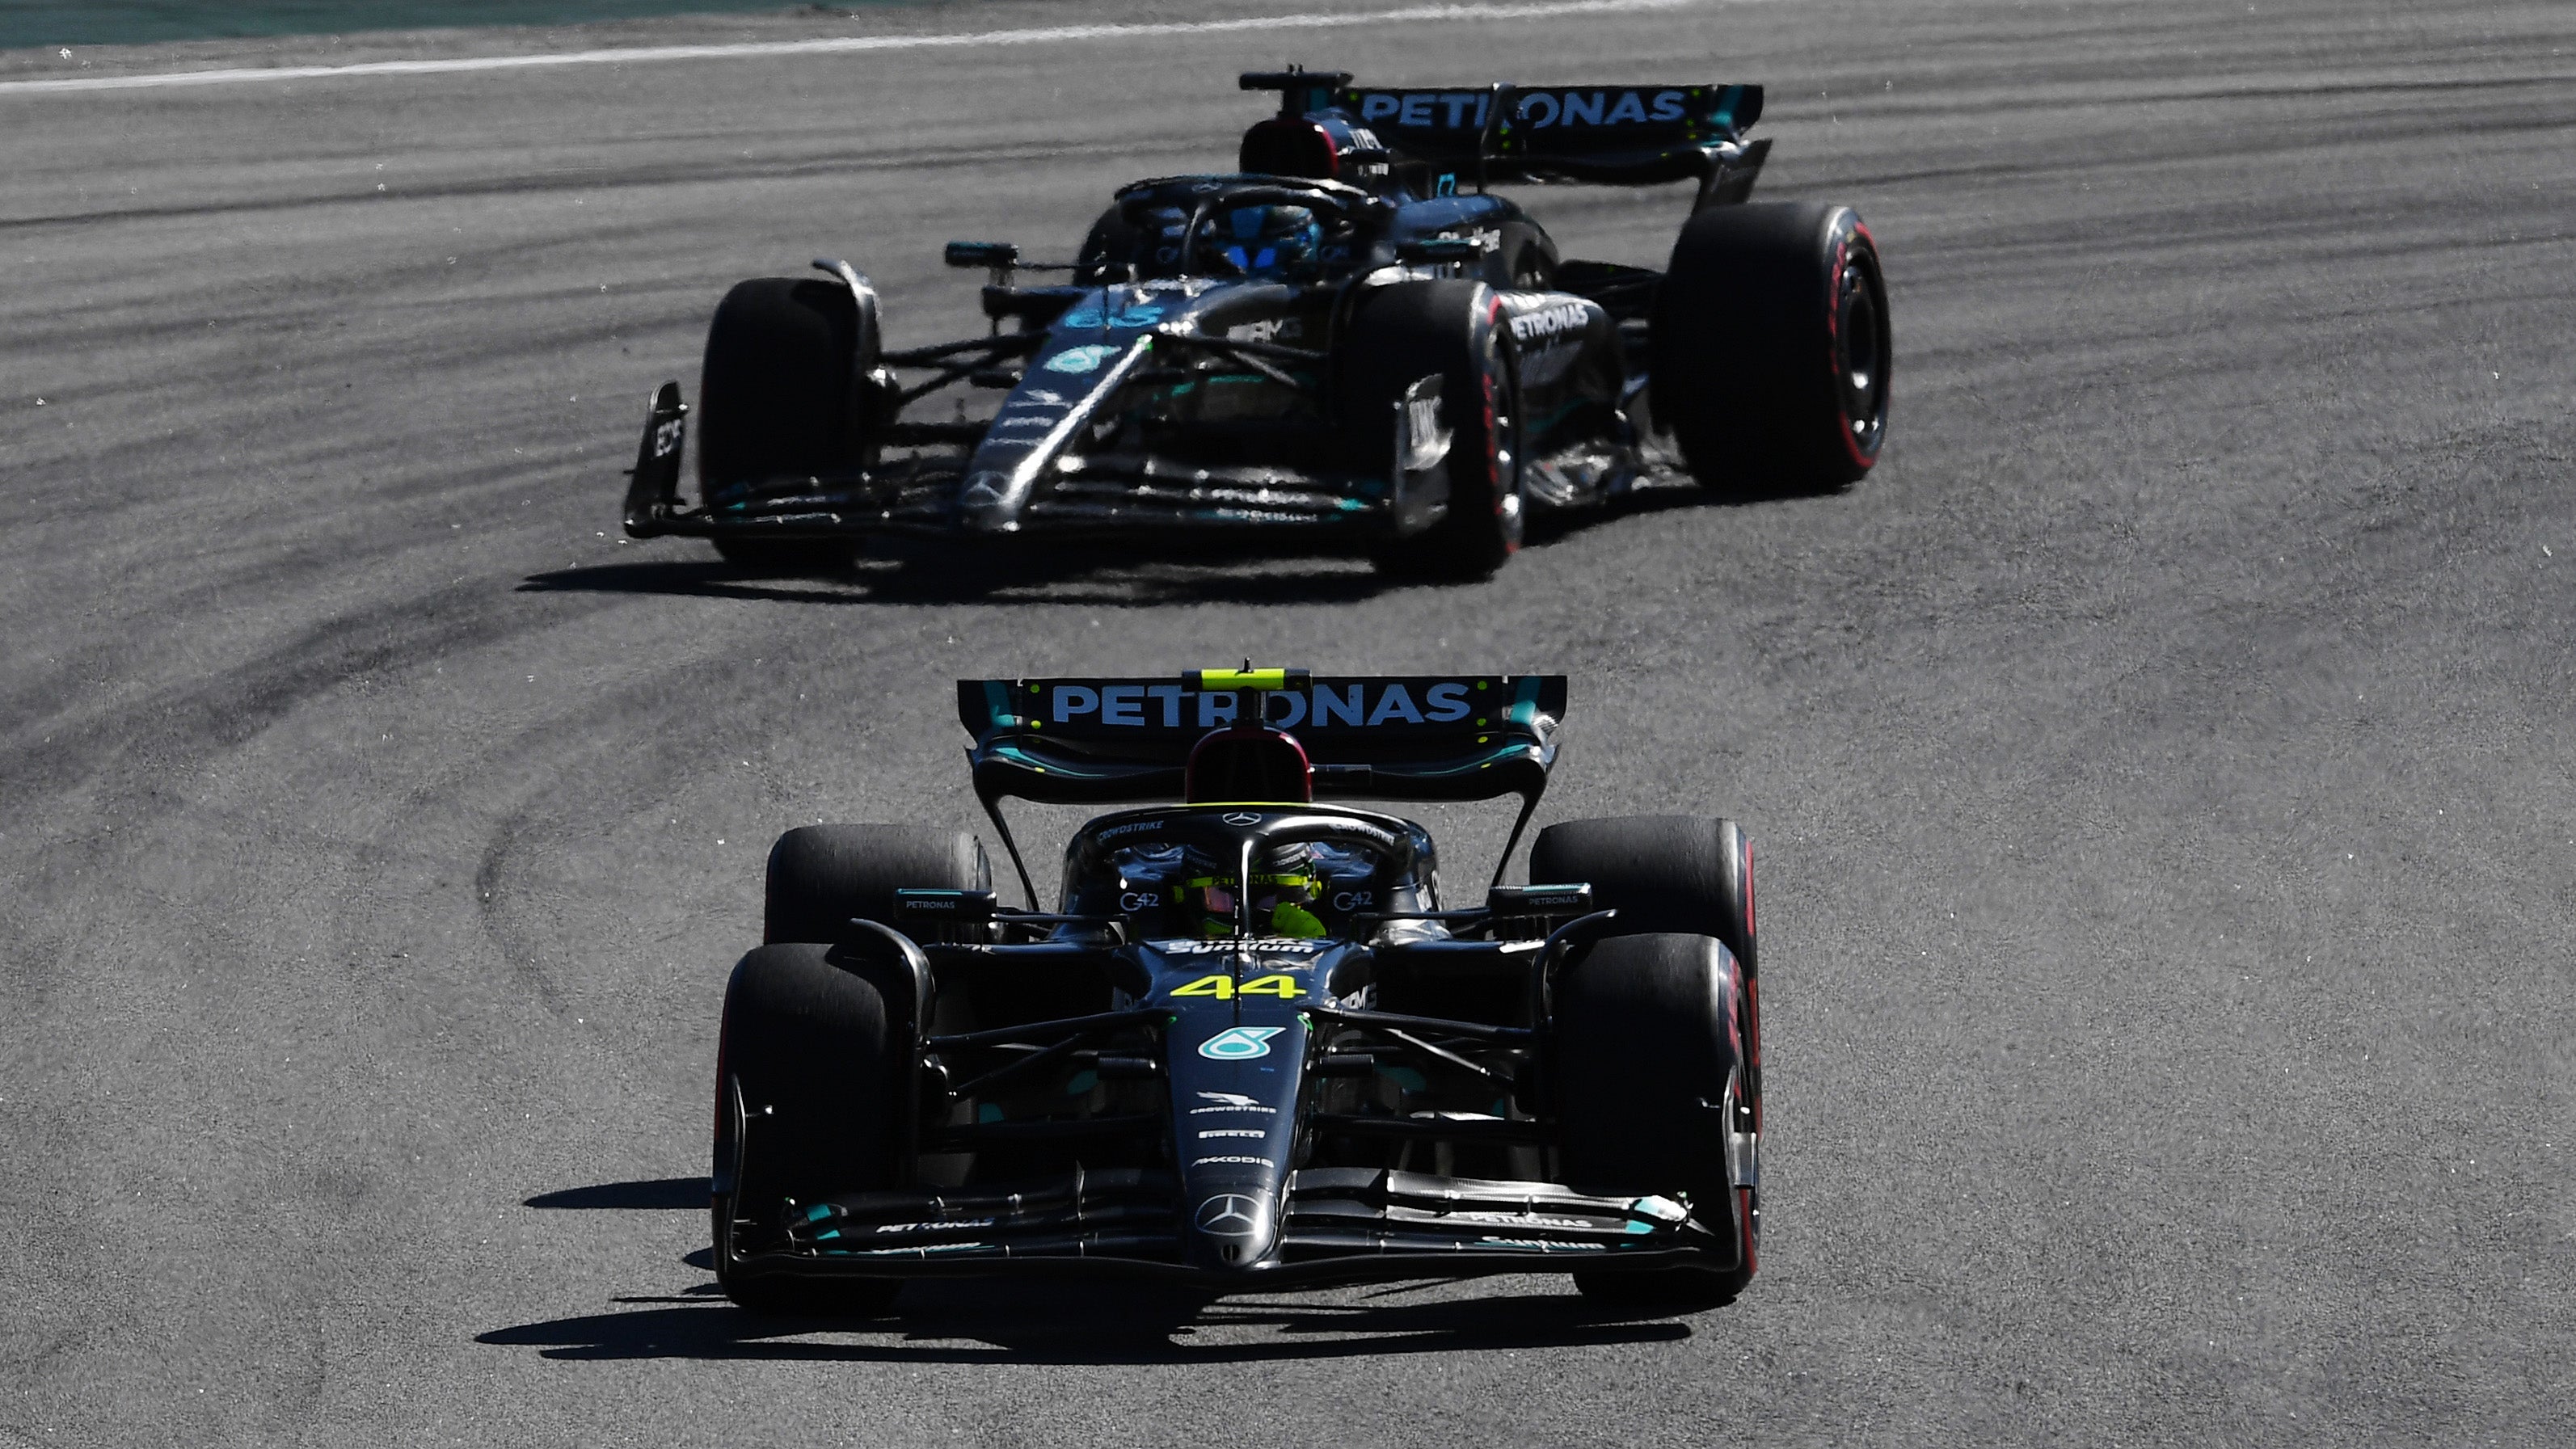 Hamilton and Mercedes team-mate Russell struggled for pace at Interlagos